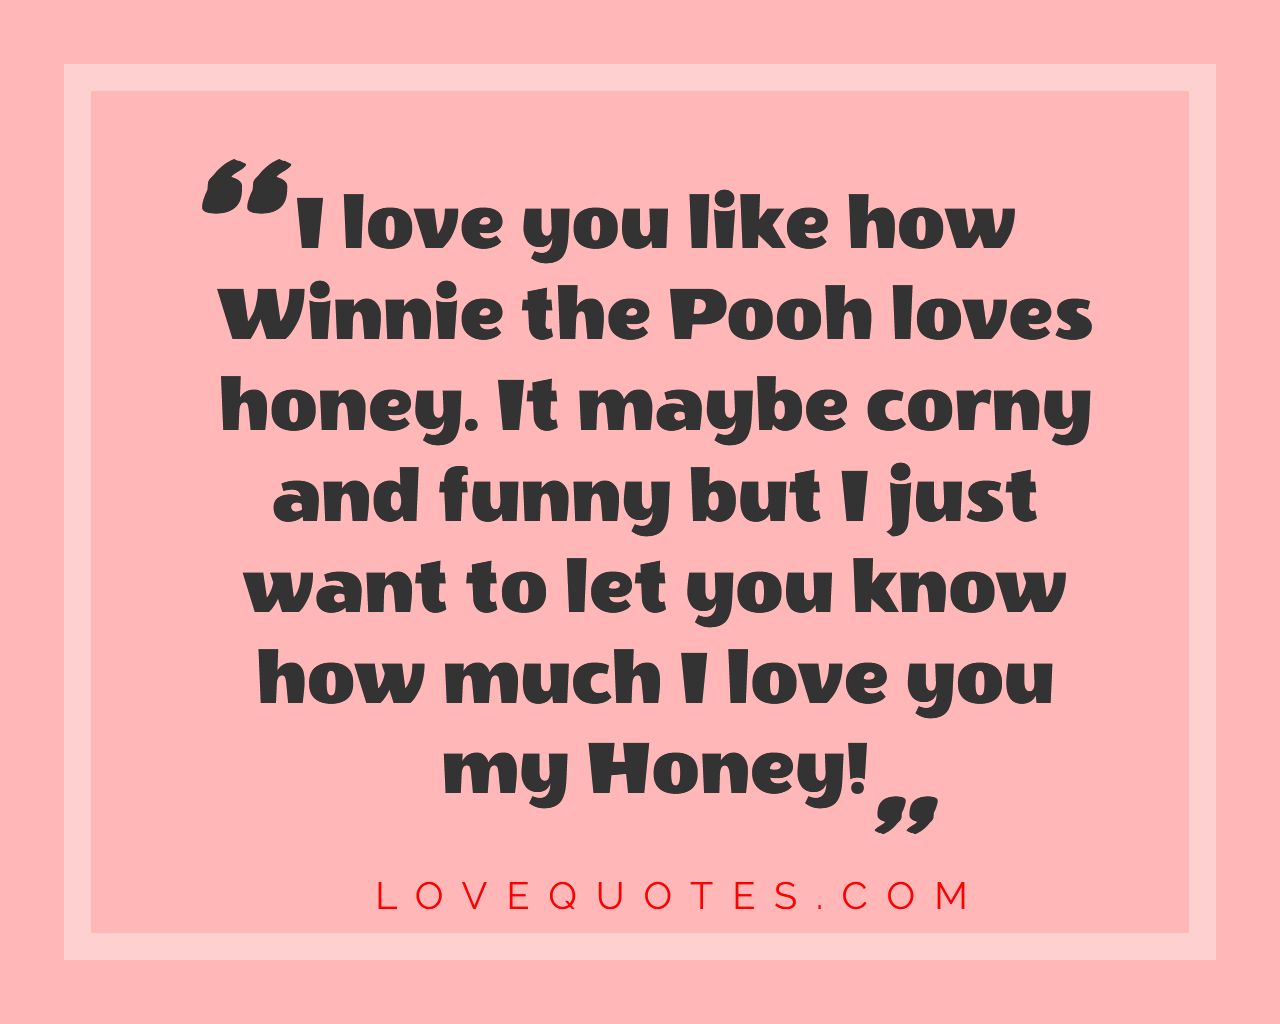 Corny And Funny - Love Quotes